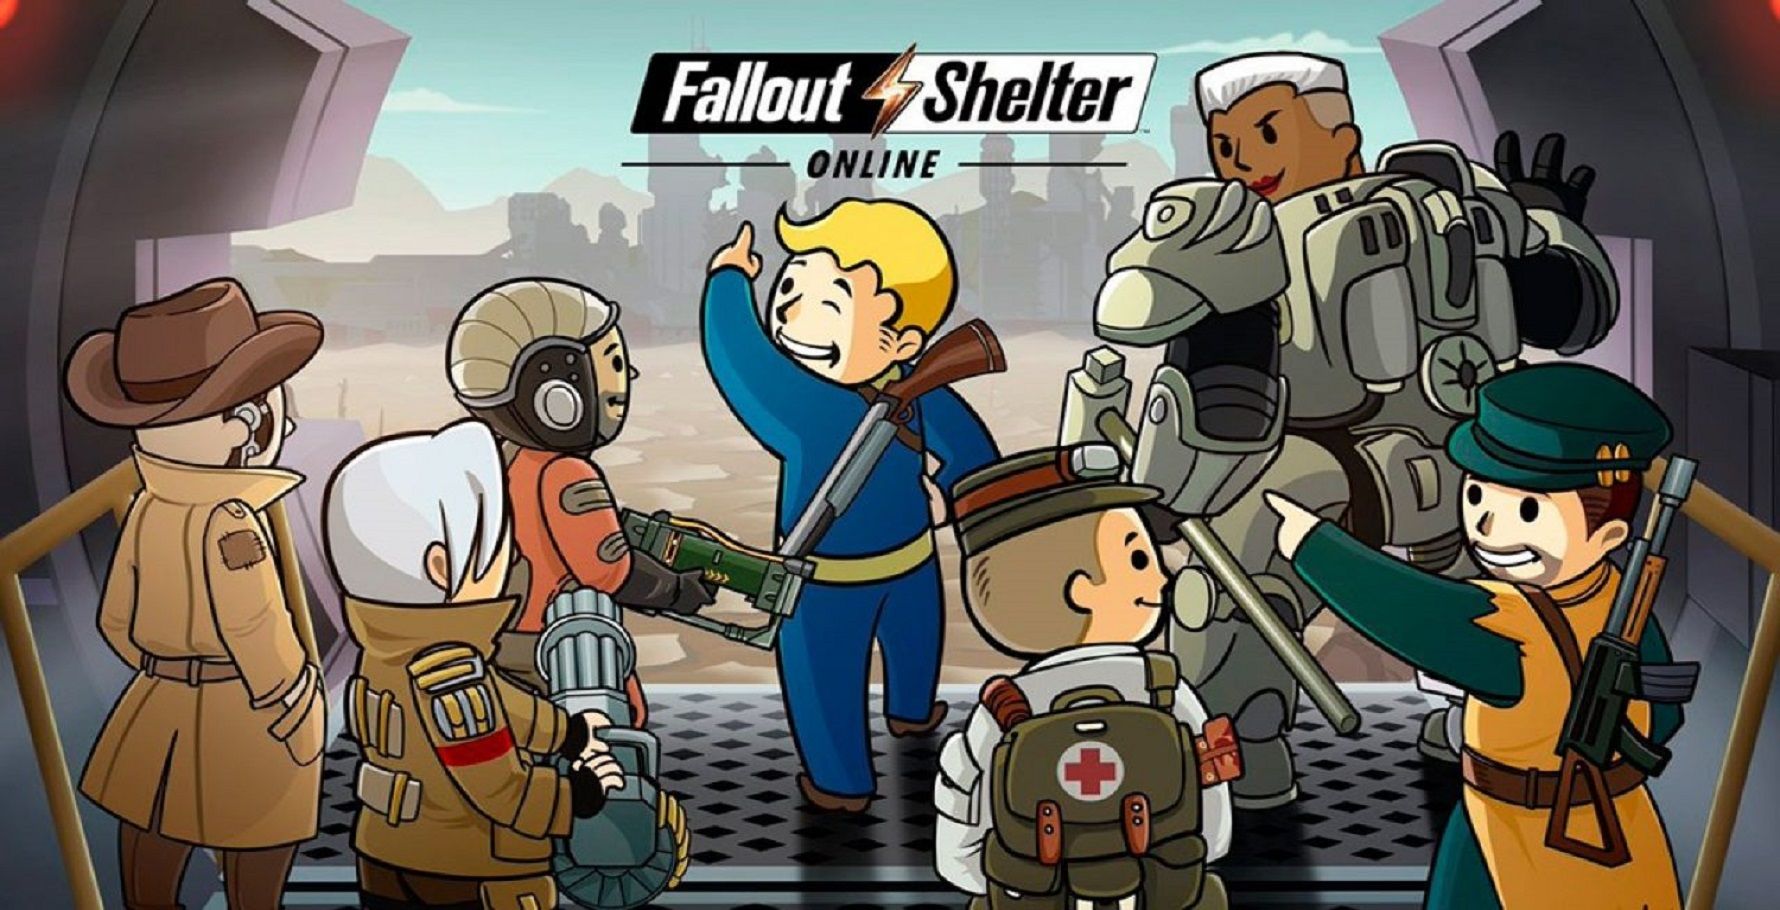 Fallout Gets Another Mobile Game In The Form Of Fallout Shelter Online